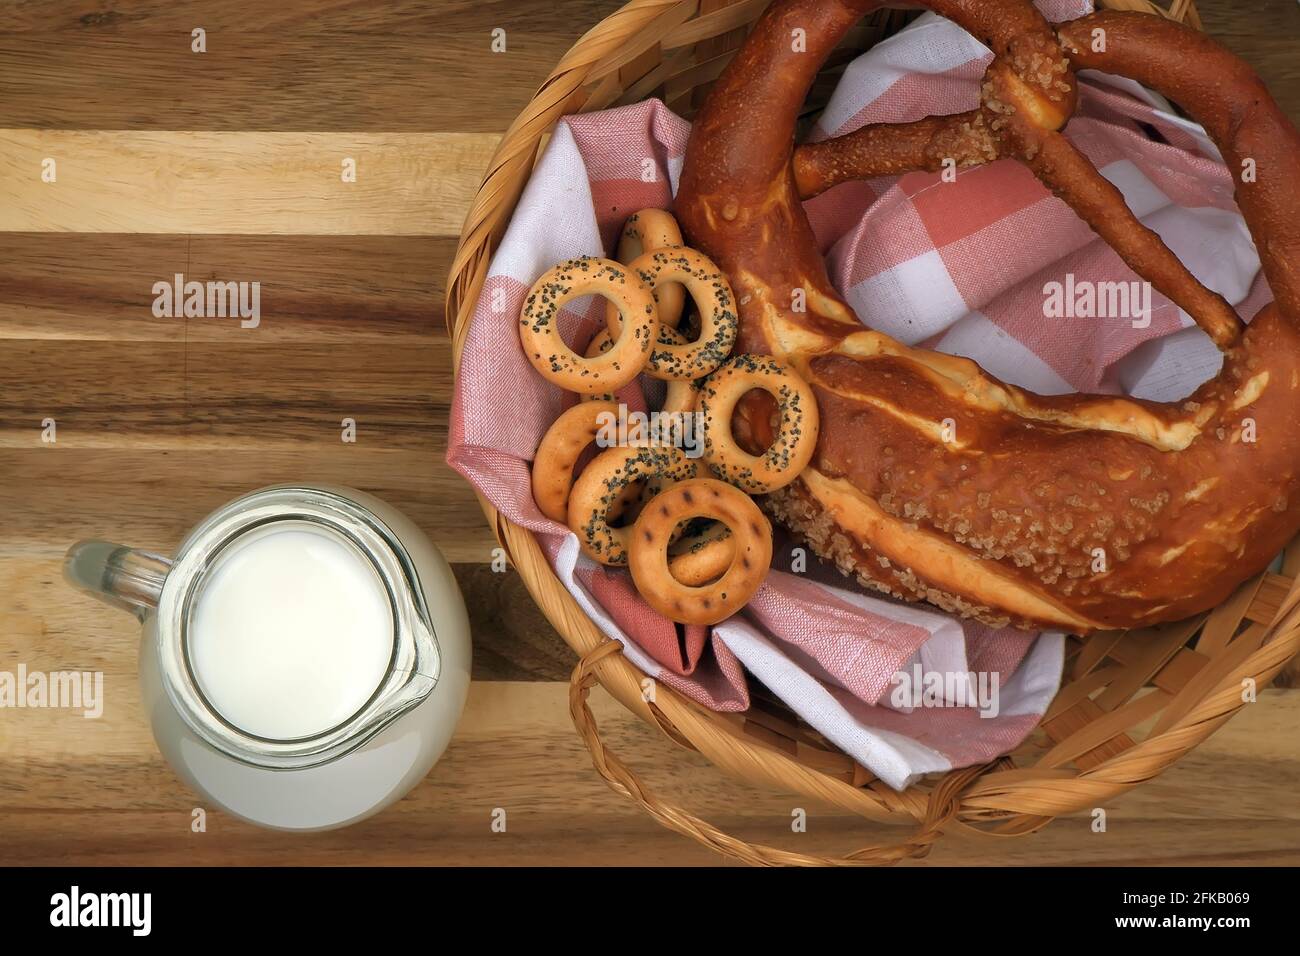 a glass jug of milk sits on the cutting board next to a basket of buns and dried poppy seeds. Stock Photo